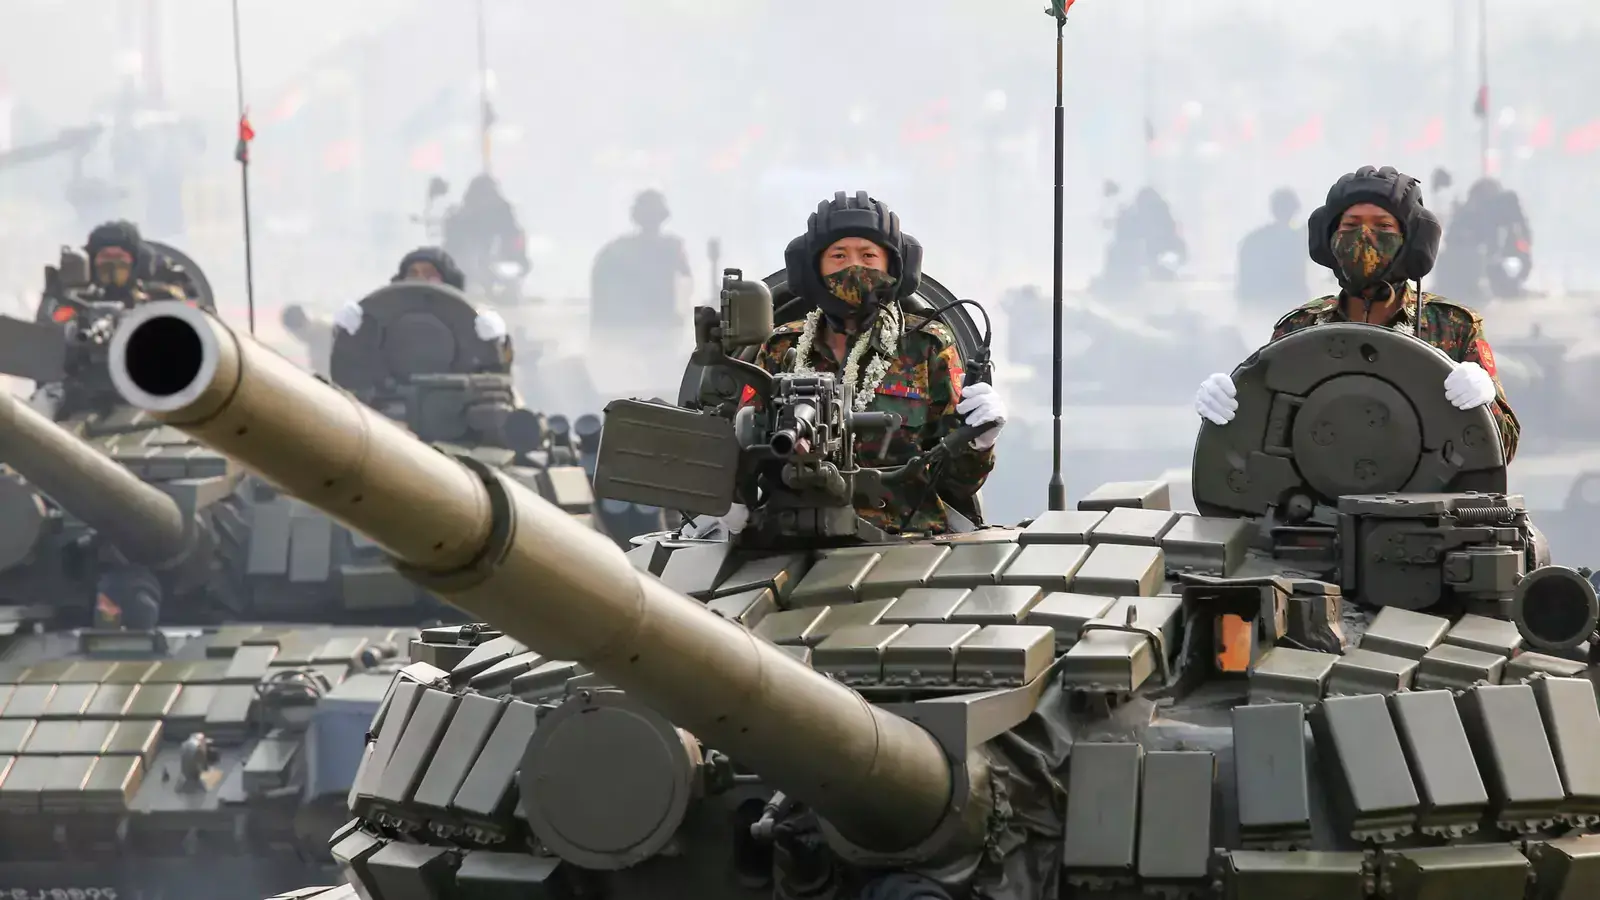 Military personnel in tanks participates in a parade on Armed Forces Day in Naypyitaw, Myanmar, on March 27, 2021.